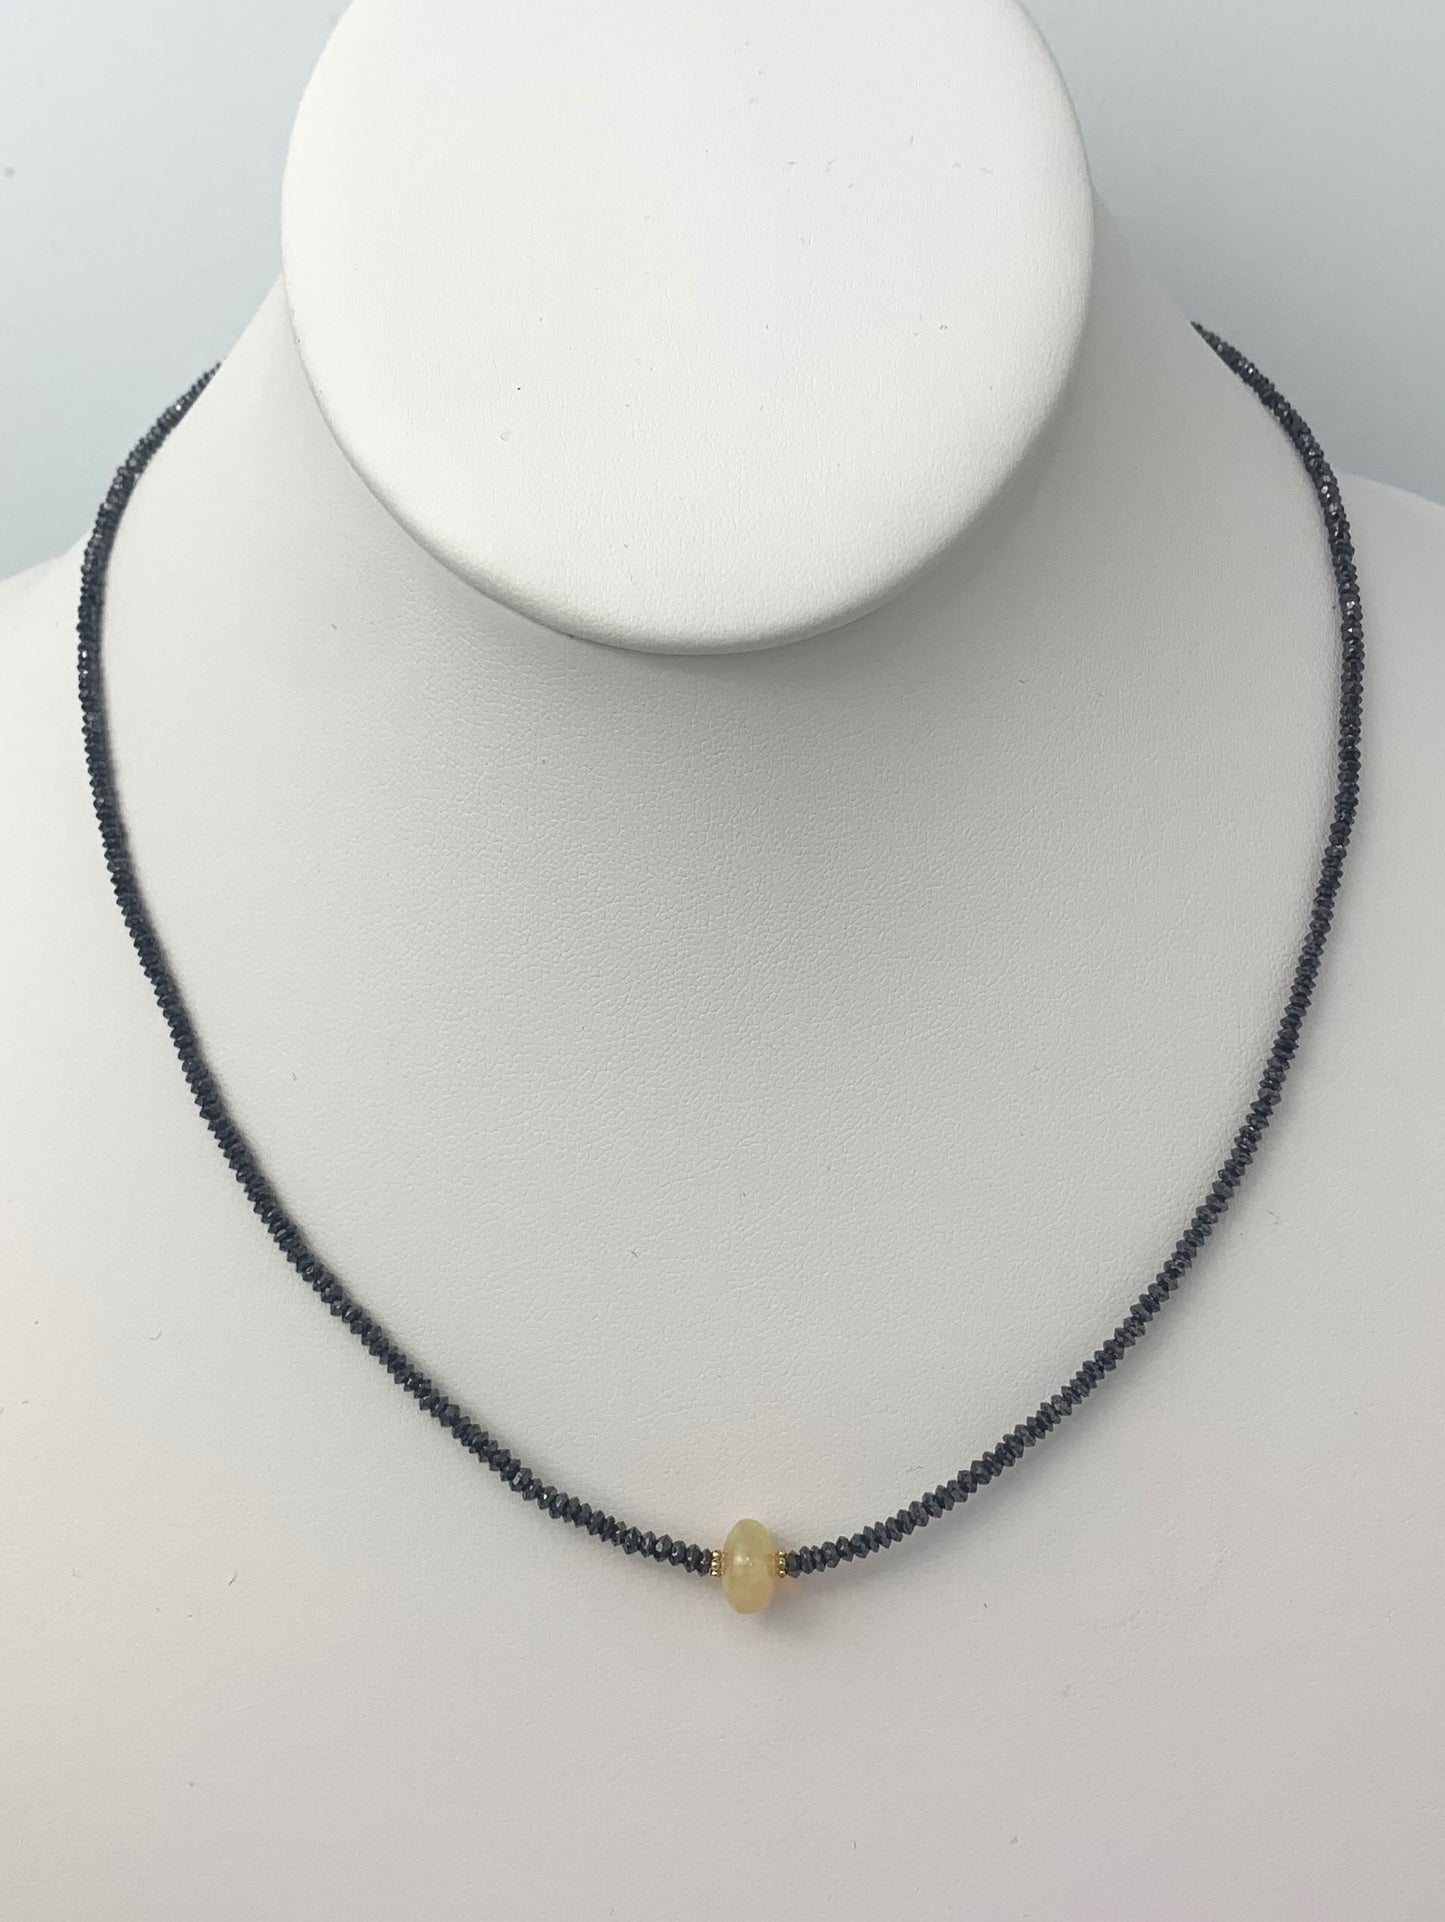 17" Black Diamond Necklace with Opal Center  in 14KY - NCK-062-CRDDIAGM14Y-BLKOP-17-05240